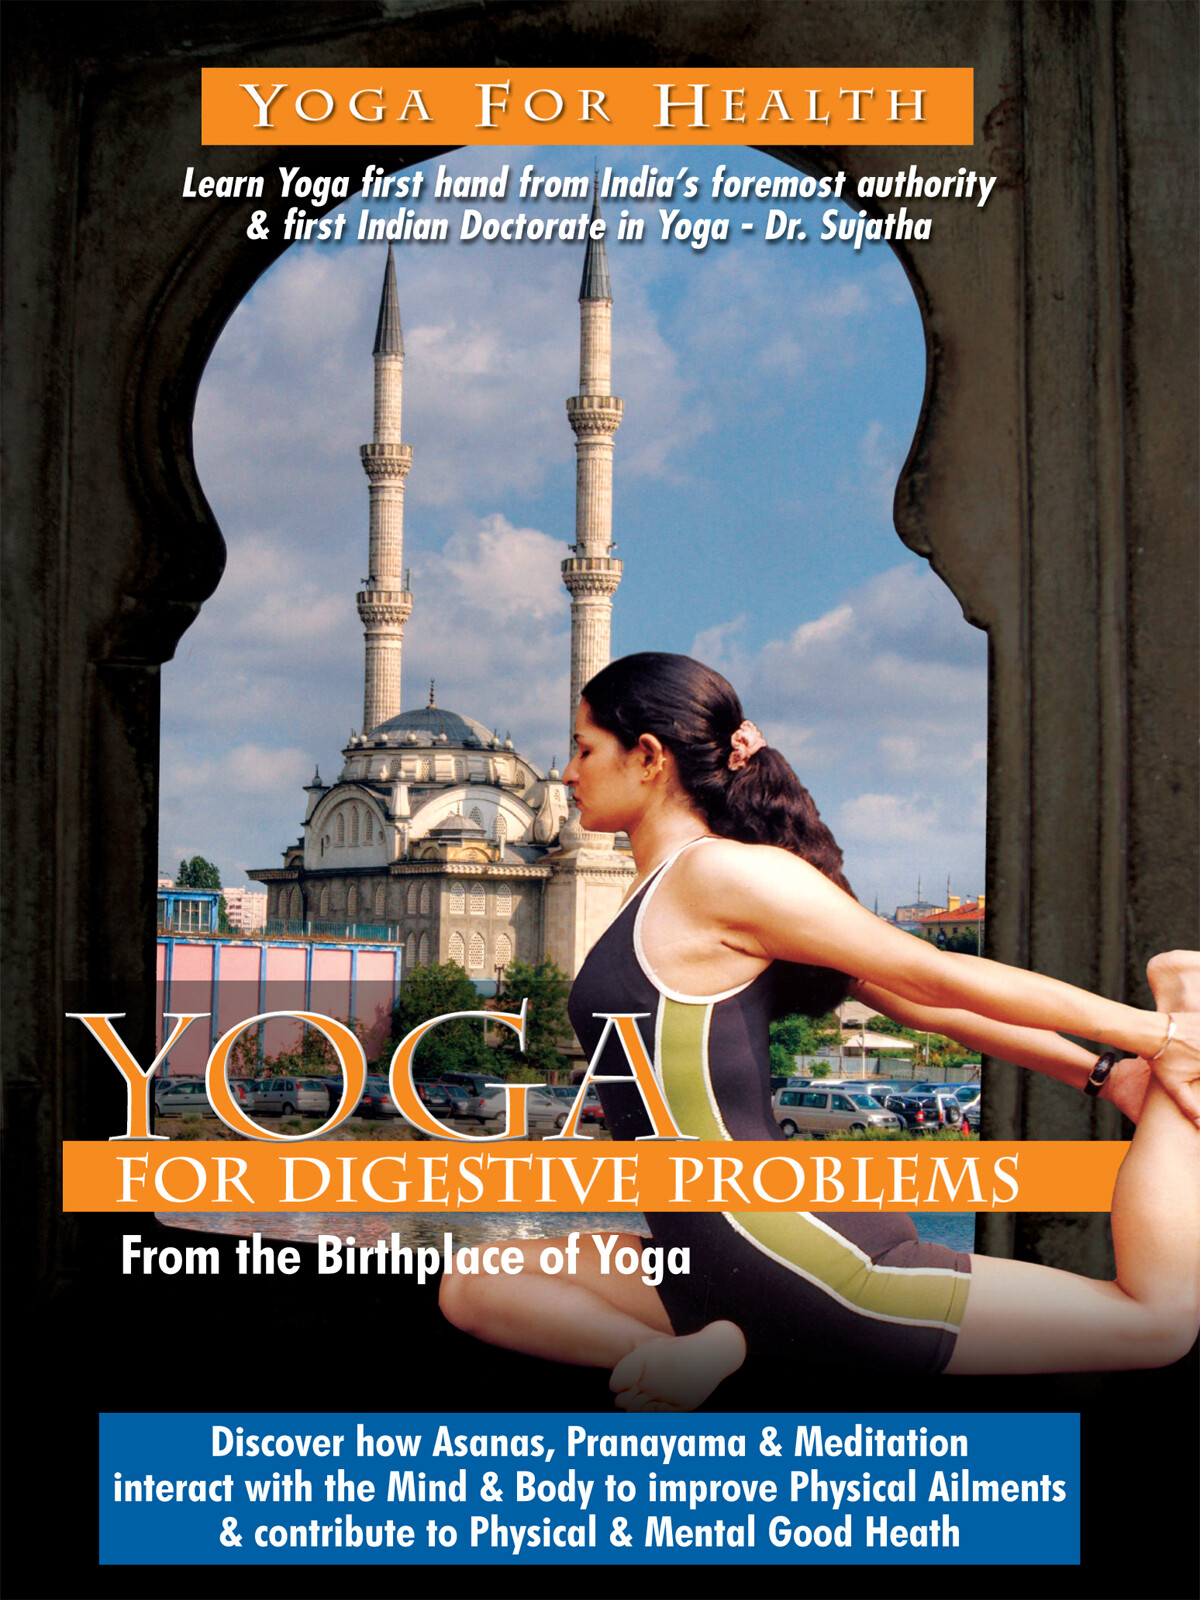 A7036 - Yoga For Health For Digestive Problems